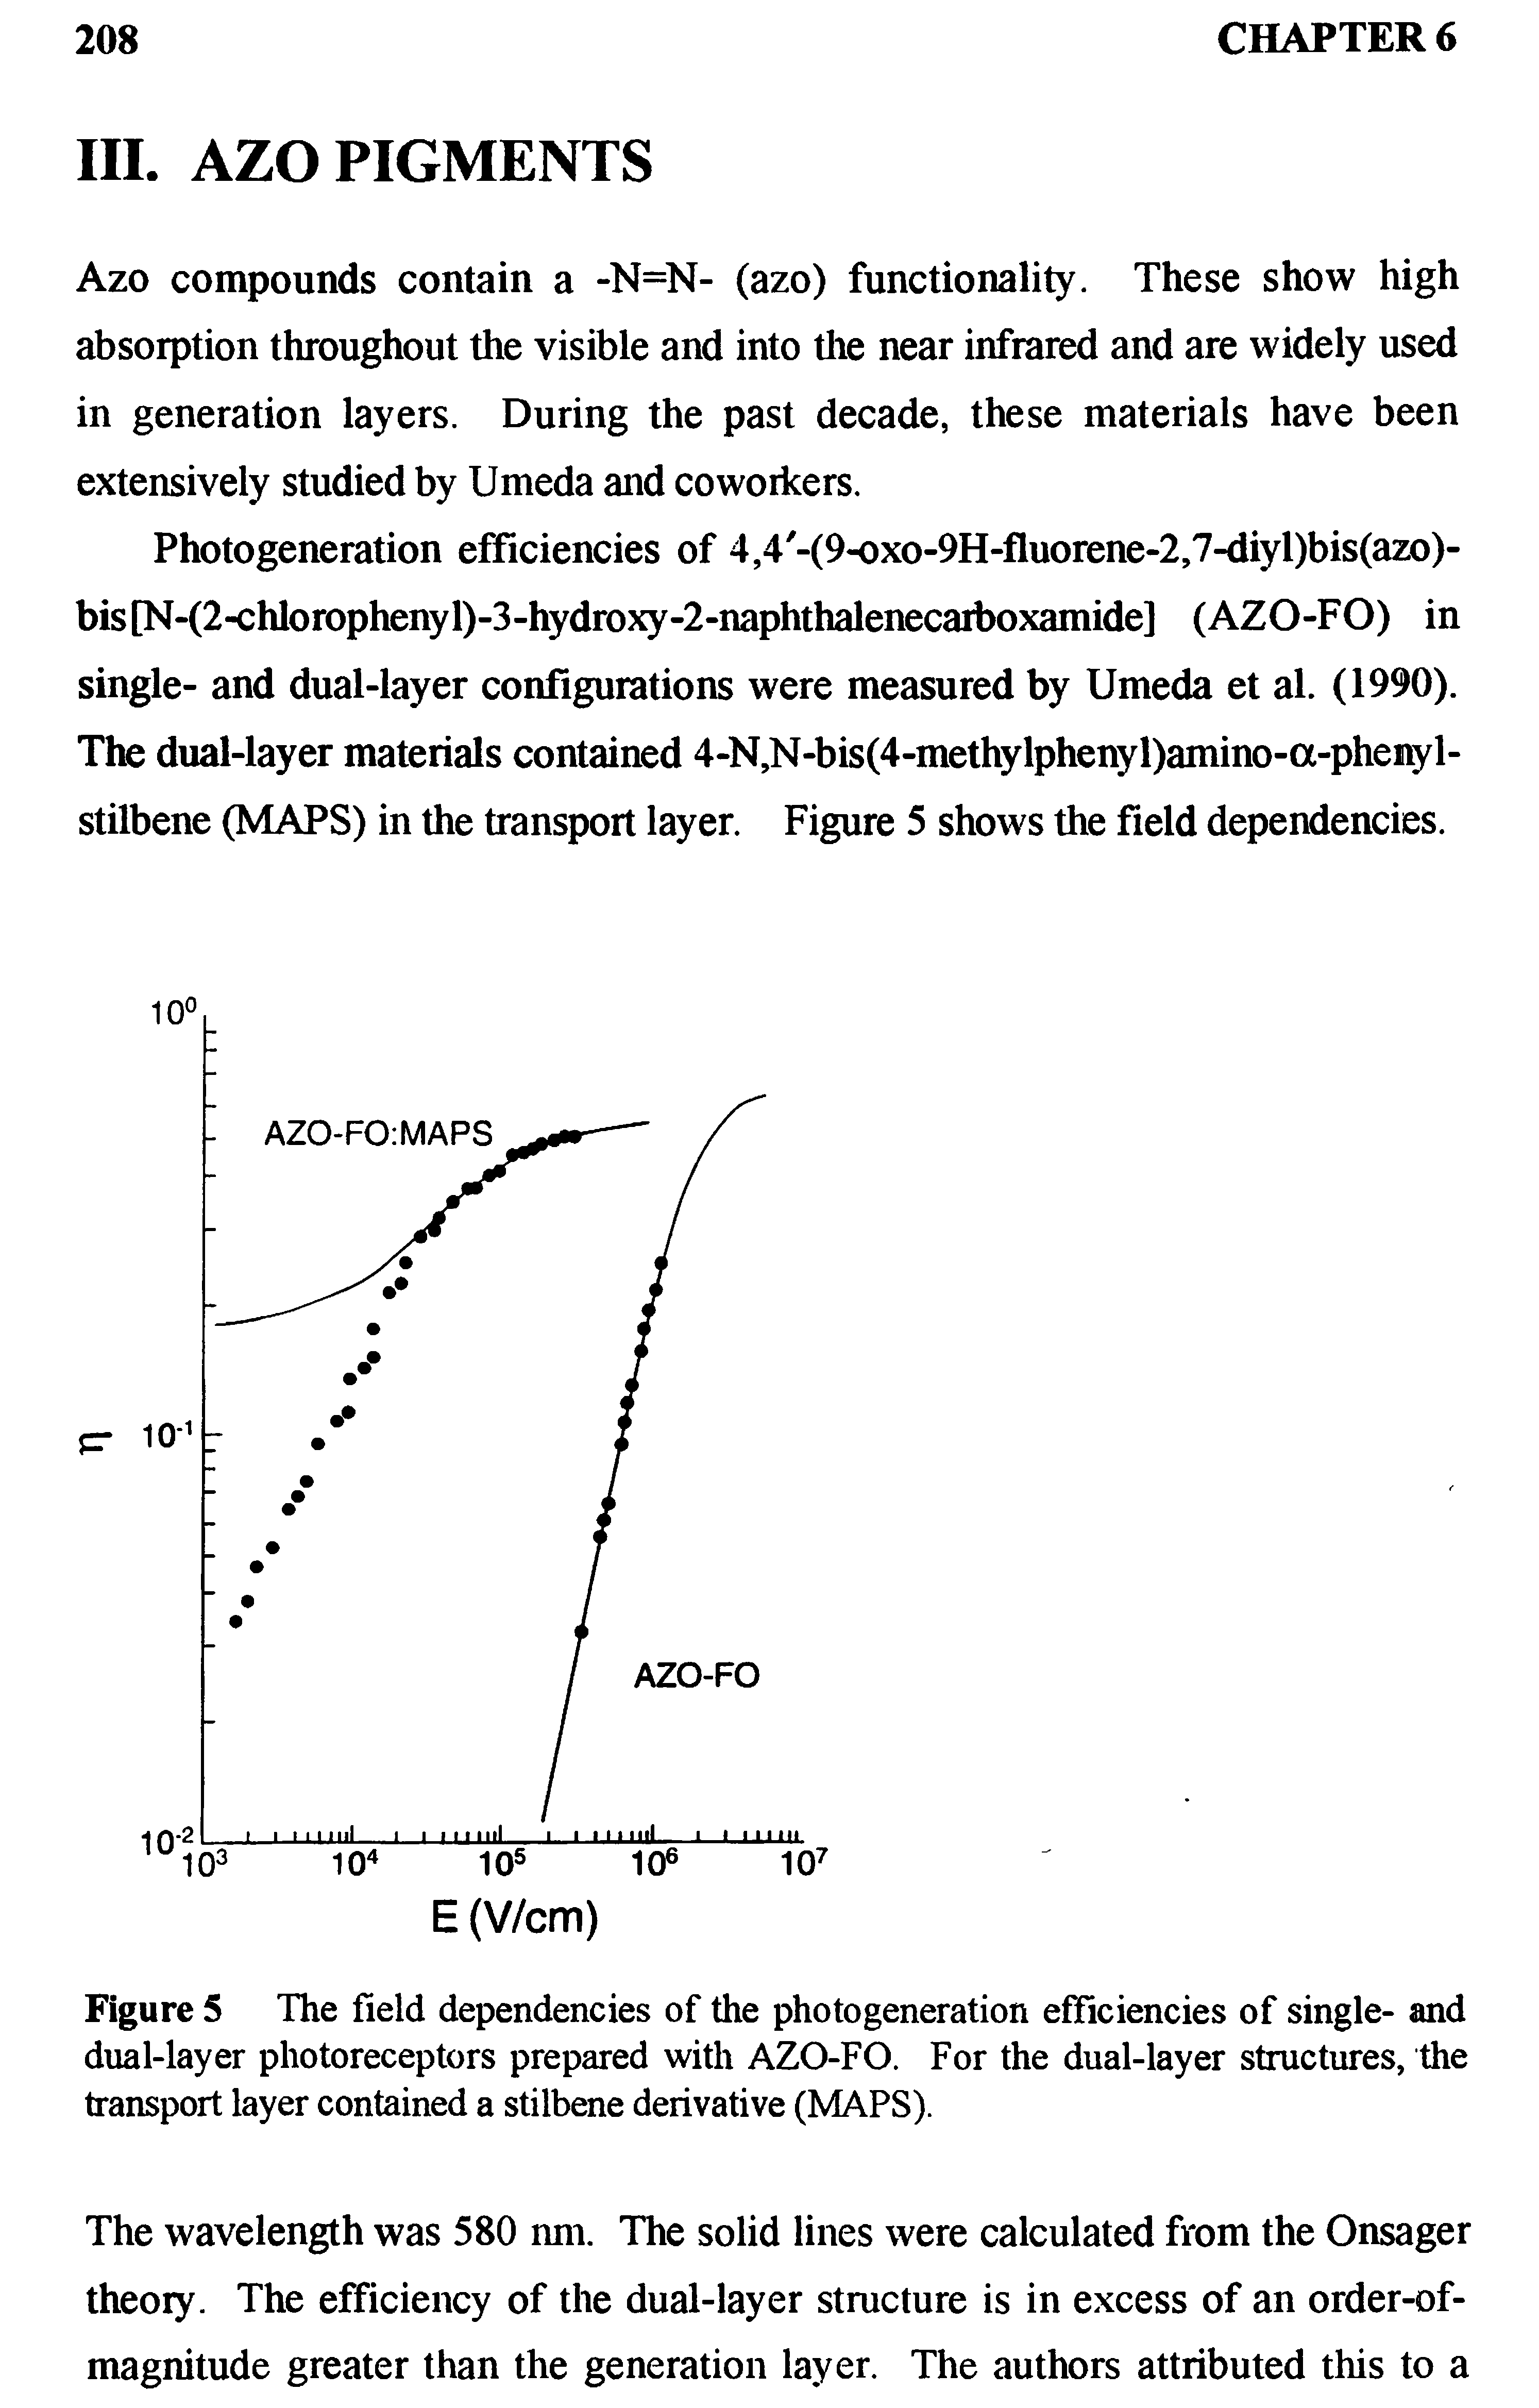 Figure 5 The field dependencies of the photogeneration efficiencies of single- and dual-layer photoreceptors prepared with AZO-FO. For the dual-layer structures, the transport layer contained a stilbene derivative (MAPS).